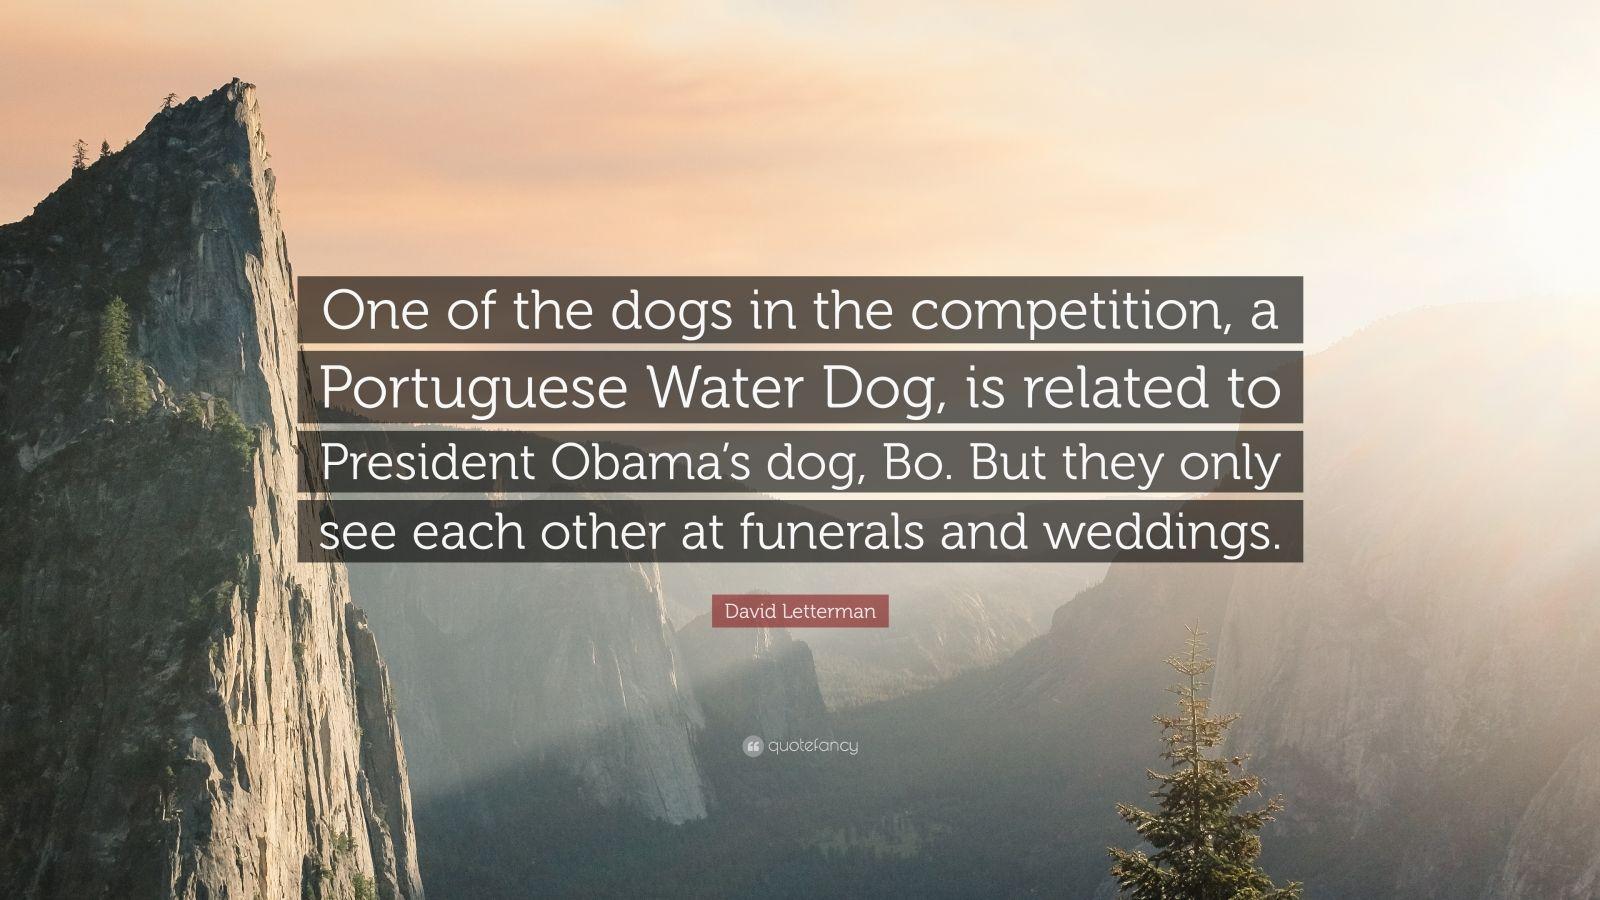 David Letterman Quote: “One of the dogs in the competition, a